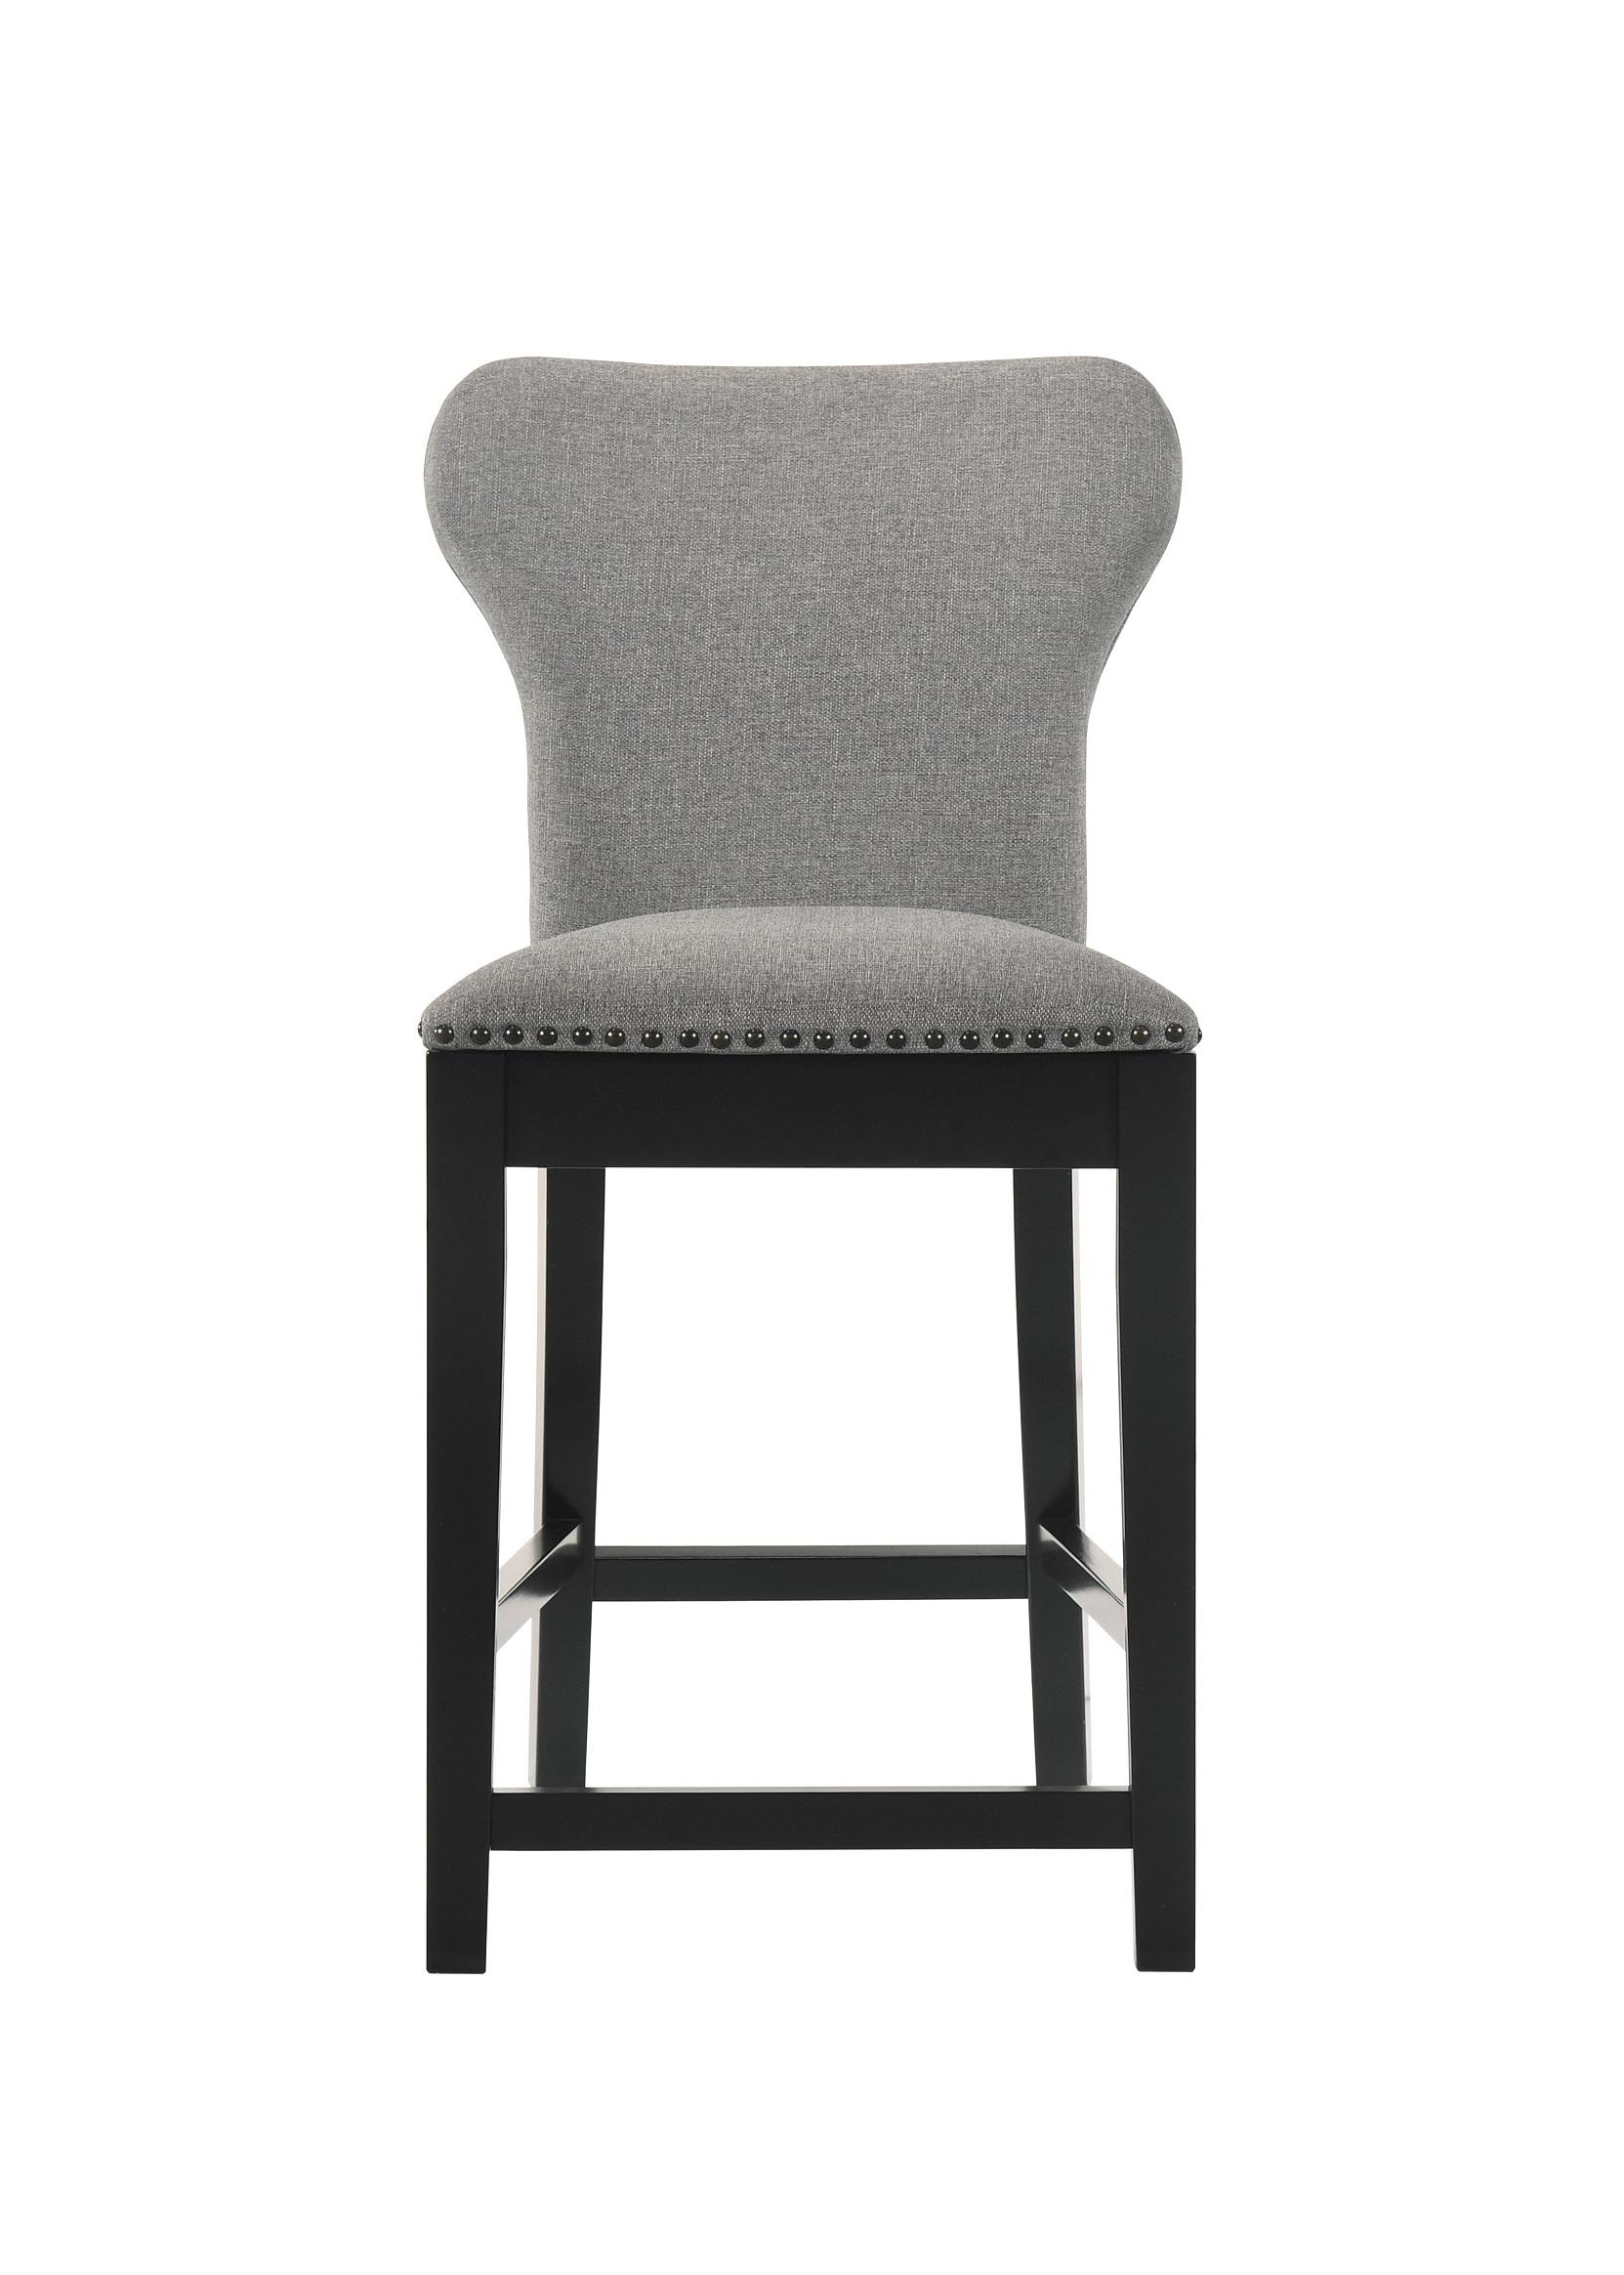 Contemporary Counter Height Stool Set 183028 183028 in Gray Fabric